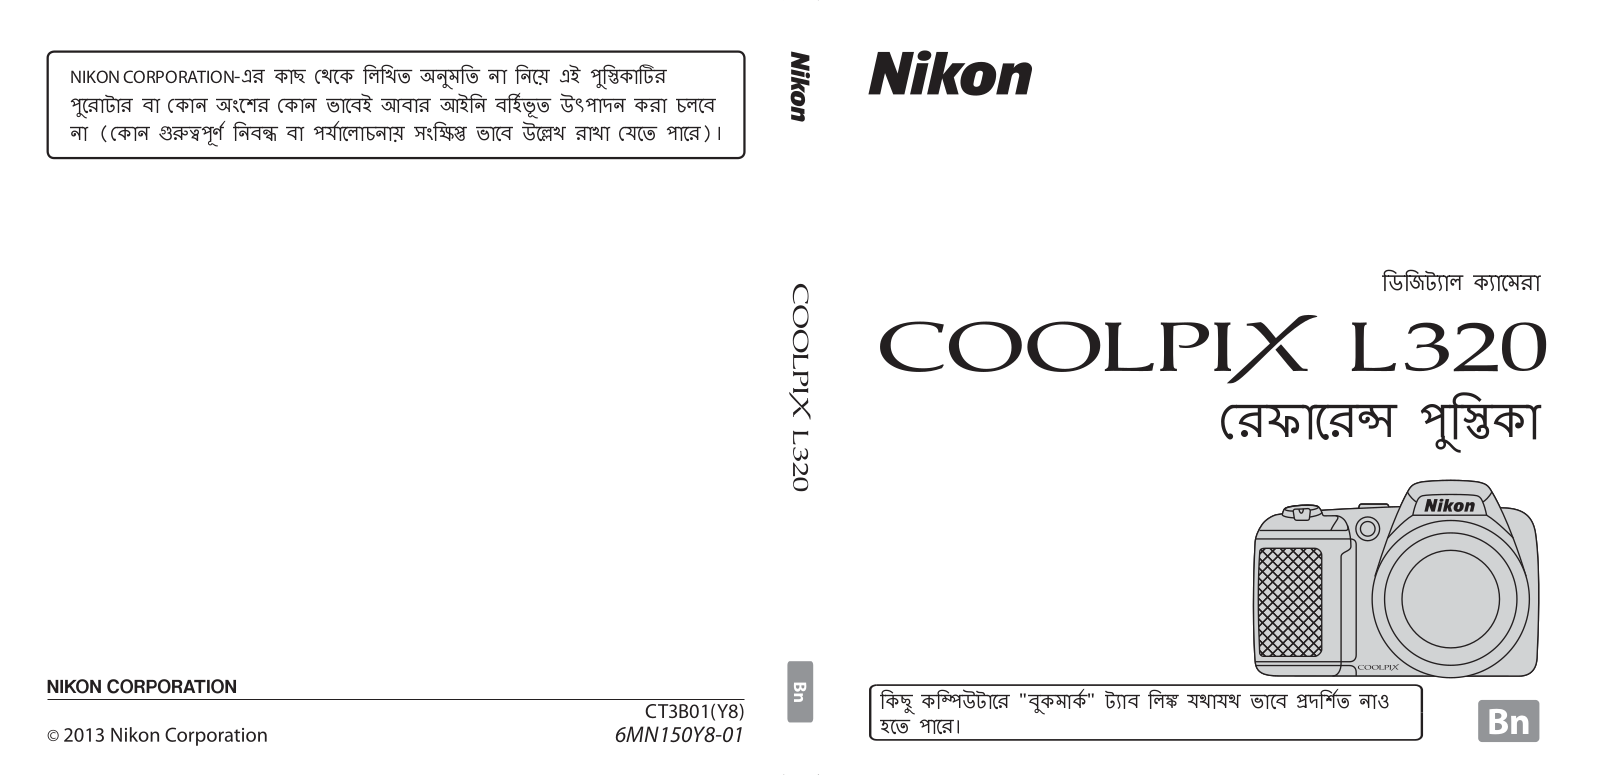 Nikon COOLPIX L320 Reference Booklet (Complete Instructions)